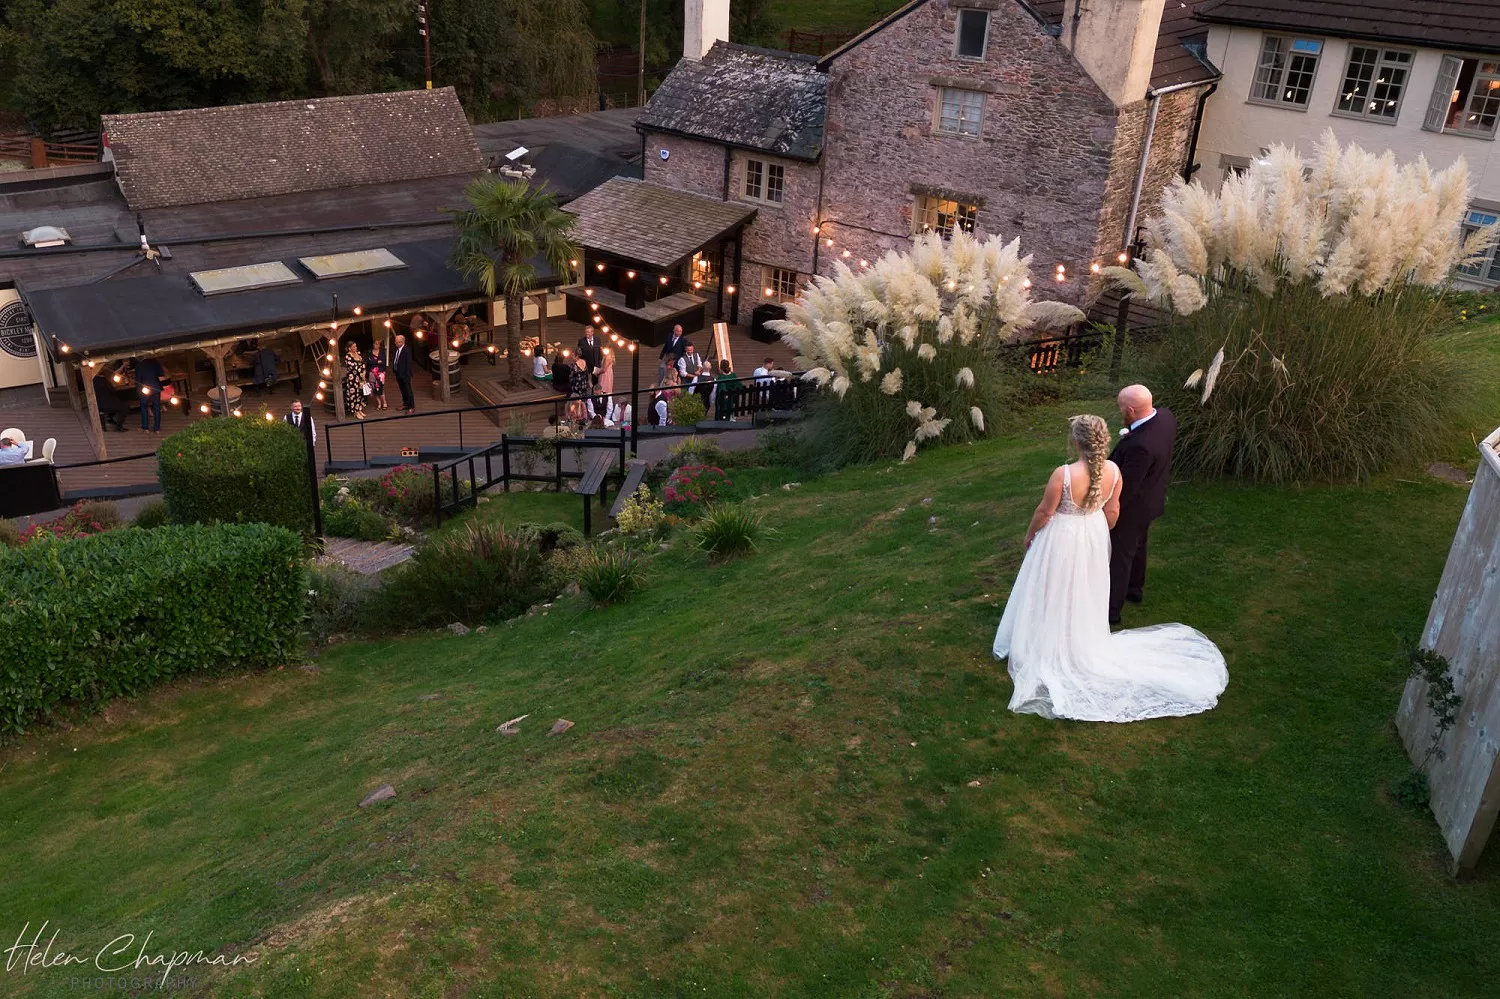 A bride and groom hold hands on a grassy hill, looking down at a warmly lit venue with guests enjoying the evening. a gentle slope leads to the festivities surrounded by stone buildings.